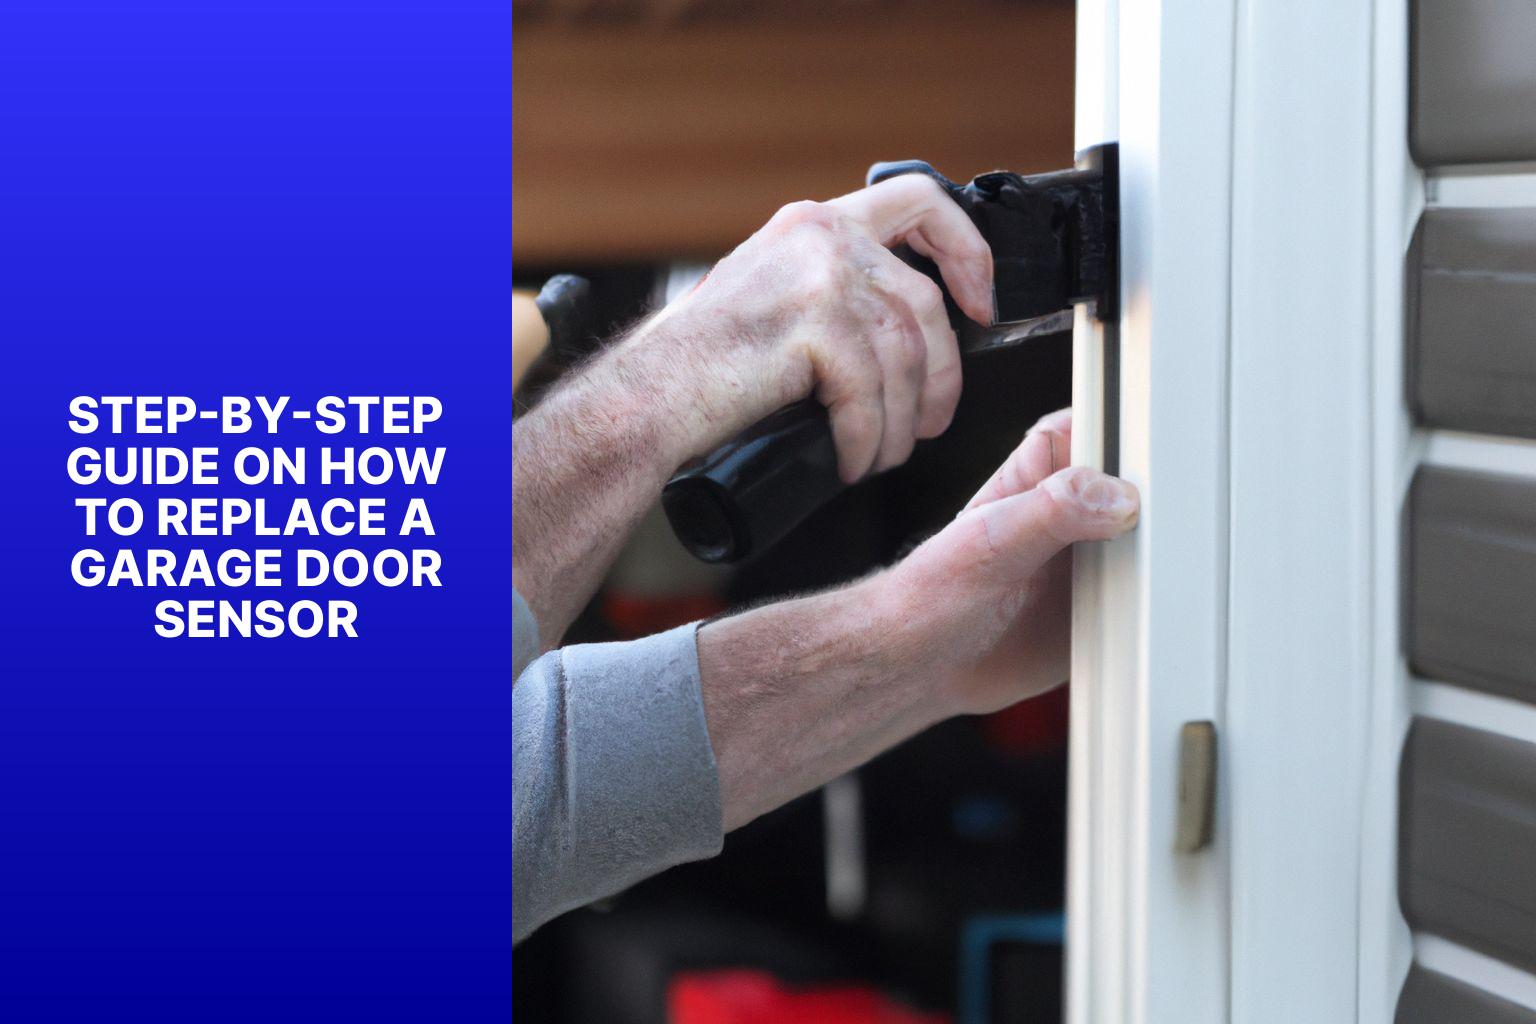 Step-by-Step Guide on How to Replace a Garage Door Sensor - How to Replace a Garage Door Sensor? 